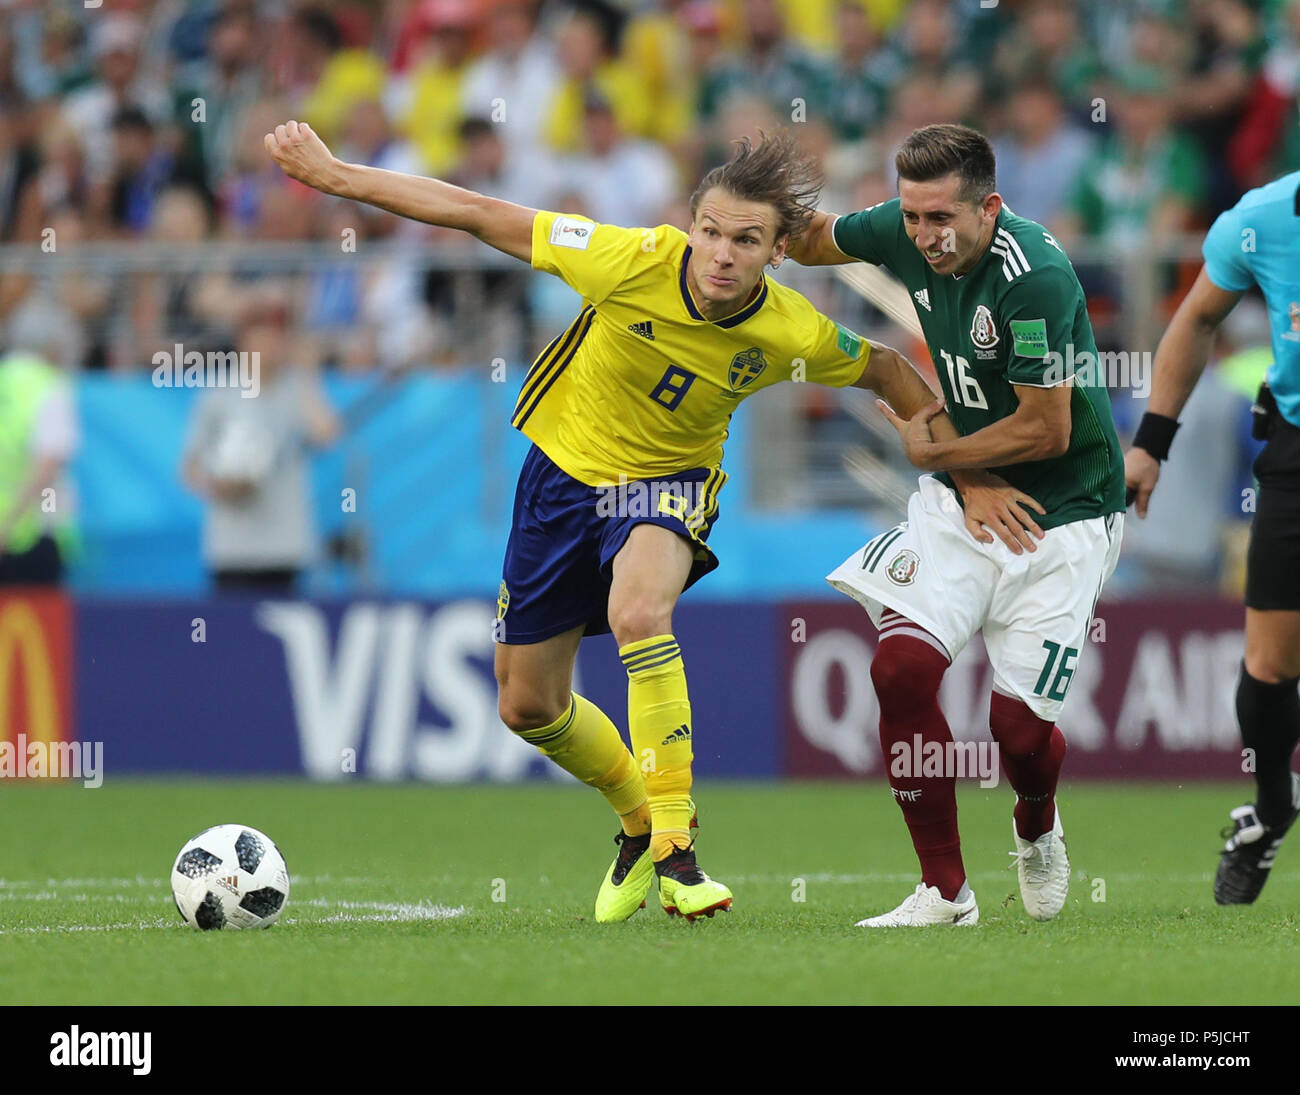 Yekaterinburg, Russia. 27th June, 2018. Albin Ekdal (L) of Sweden vies with Hector Herrera of Mexico during the 2018 FIFA World Cup Group F match between Mexico and Sweden in Yekaterinburg, Russia, June 27, 2018. Credit: Lu Jinbo/Xinhua/Alamy Live News Stock Photo